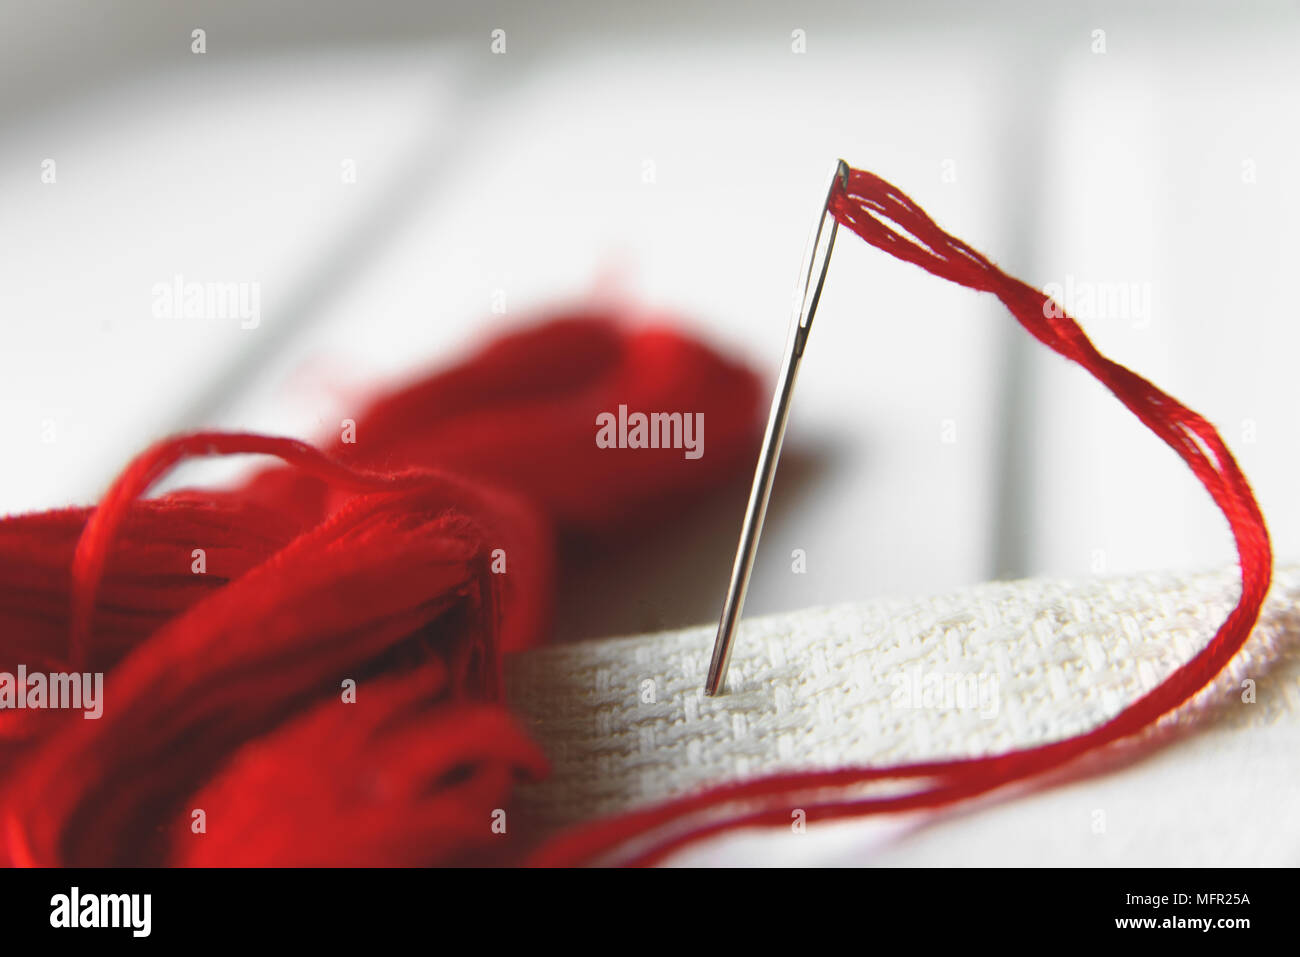 A Needle and red thread over white Stock Photo - Alamy